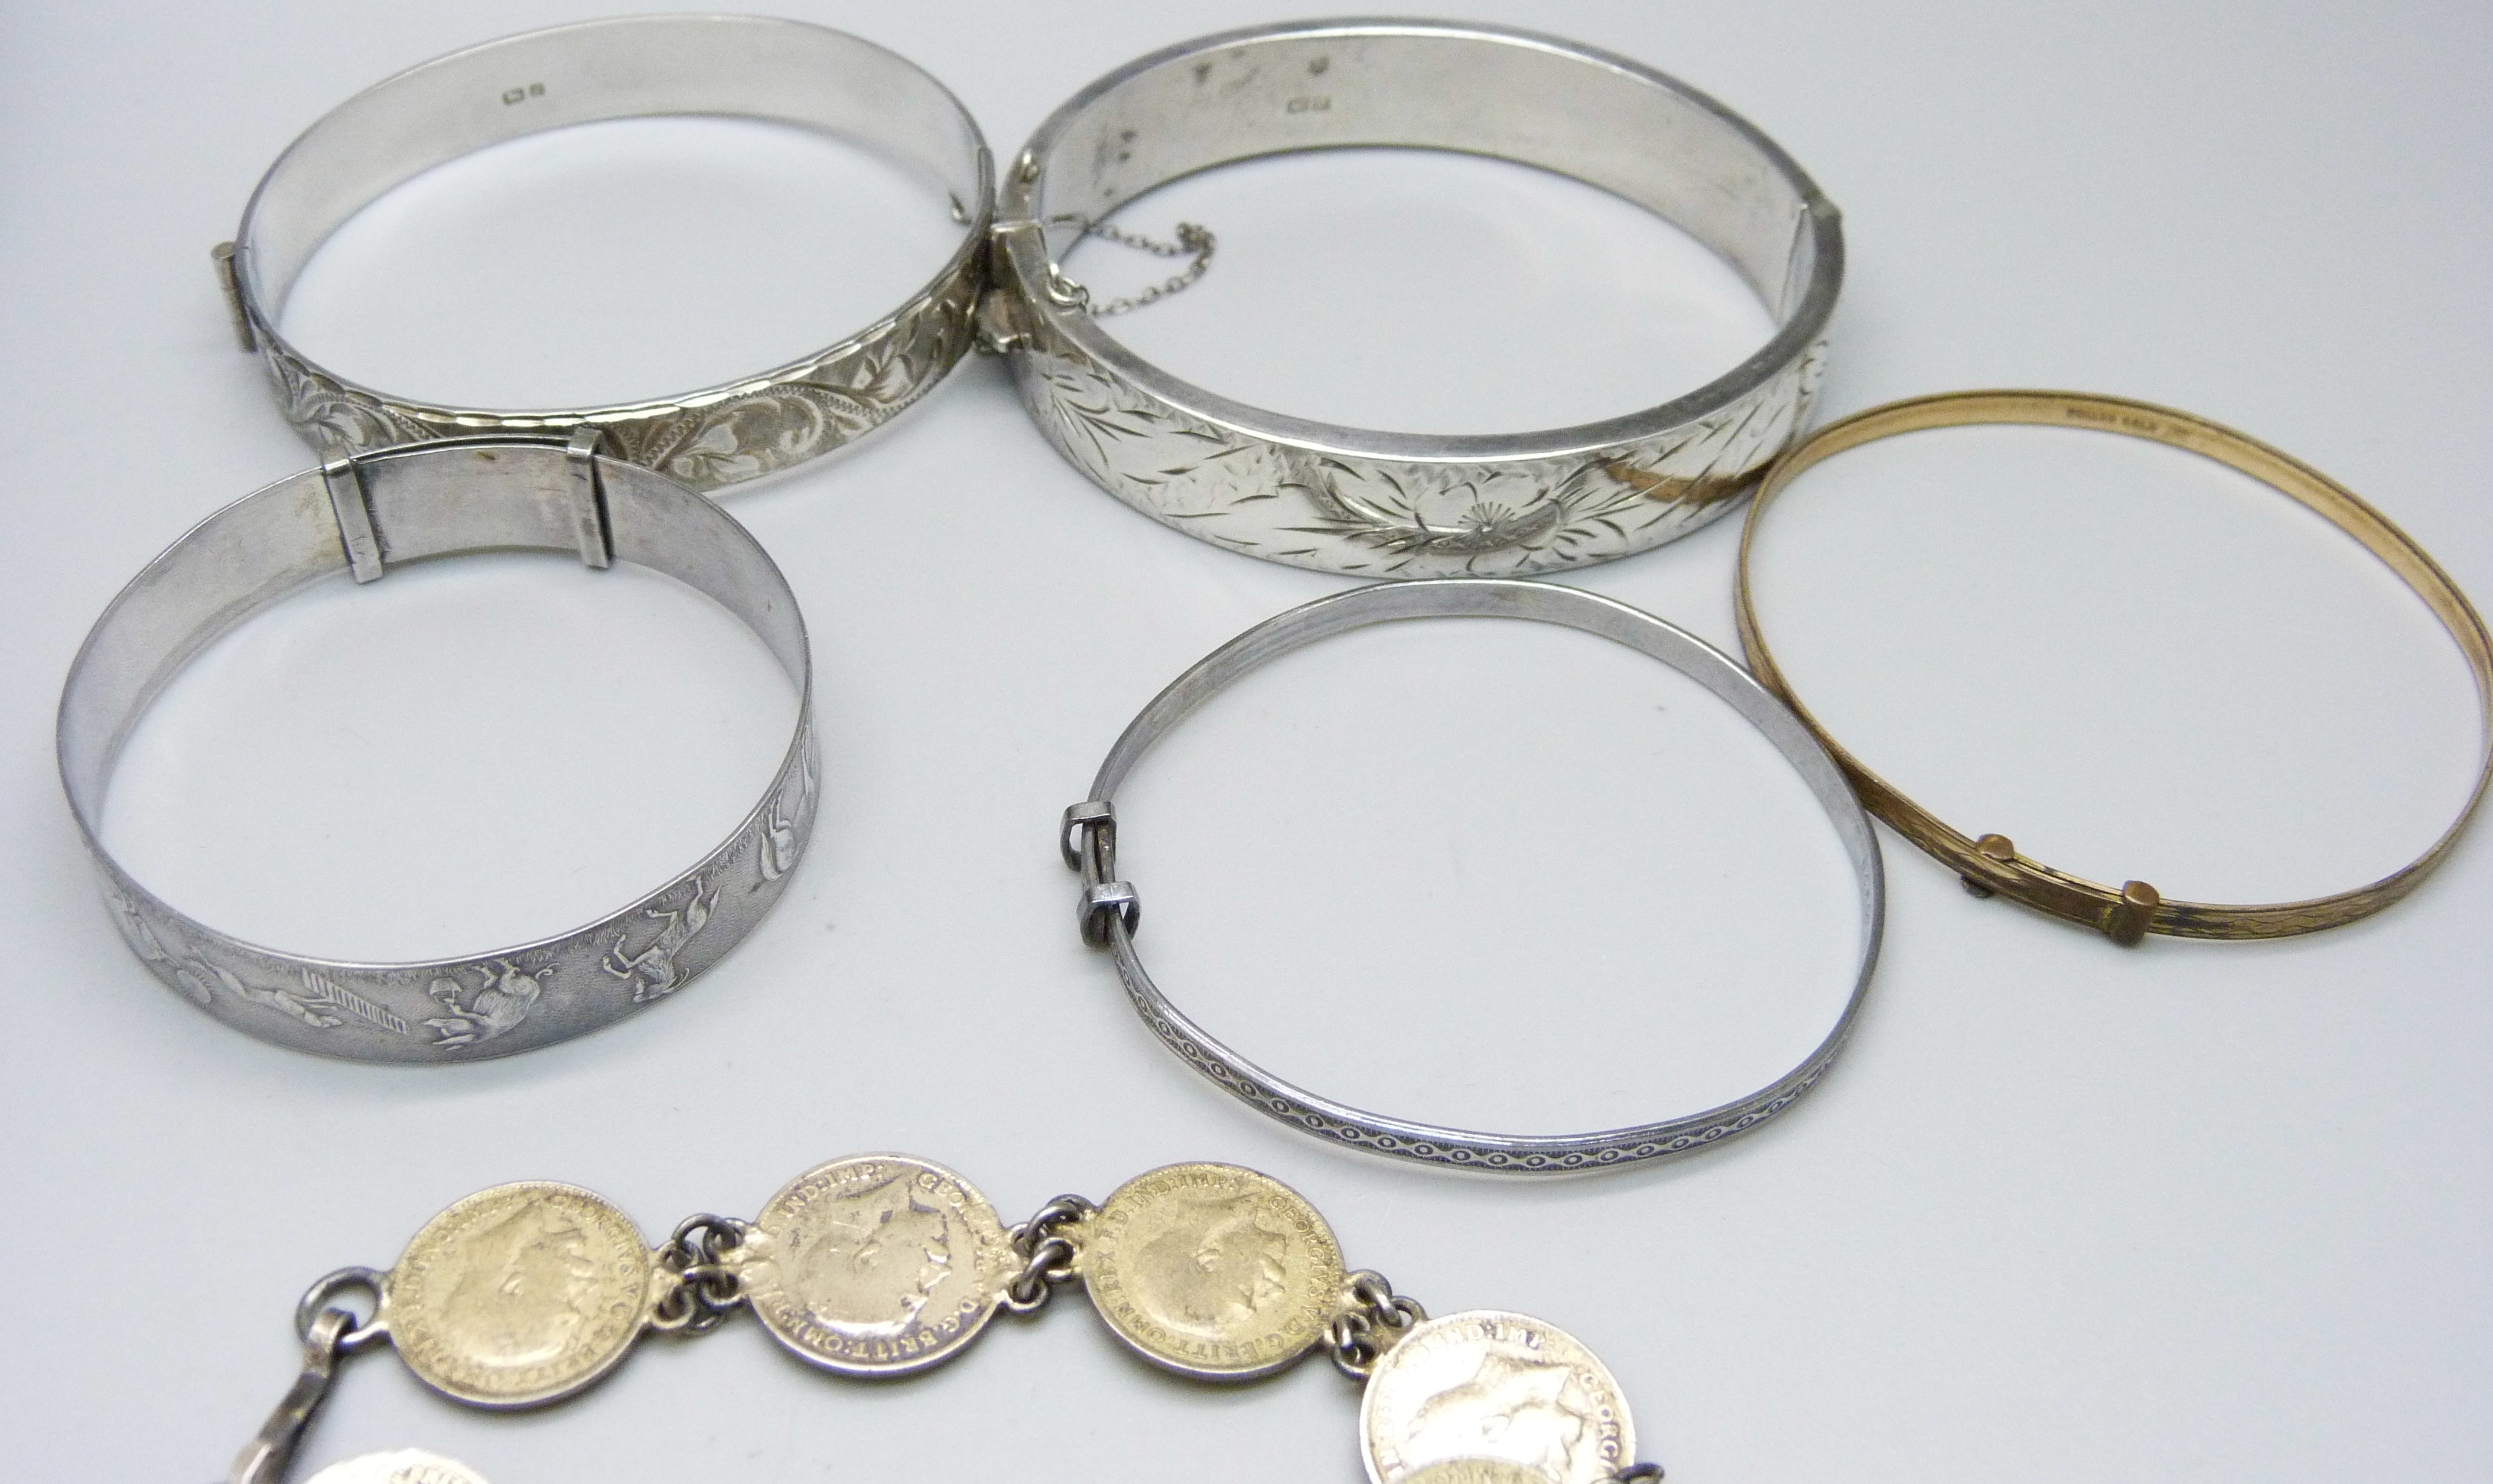 Silver jewellery including four silver bangles and a silver charm bracelet, coins and a sovereign - Image 3 of 6